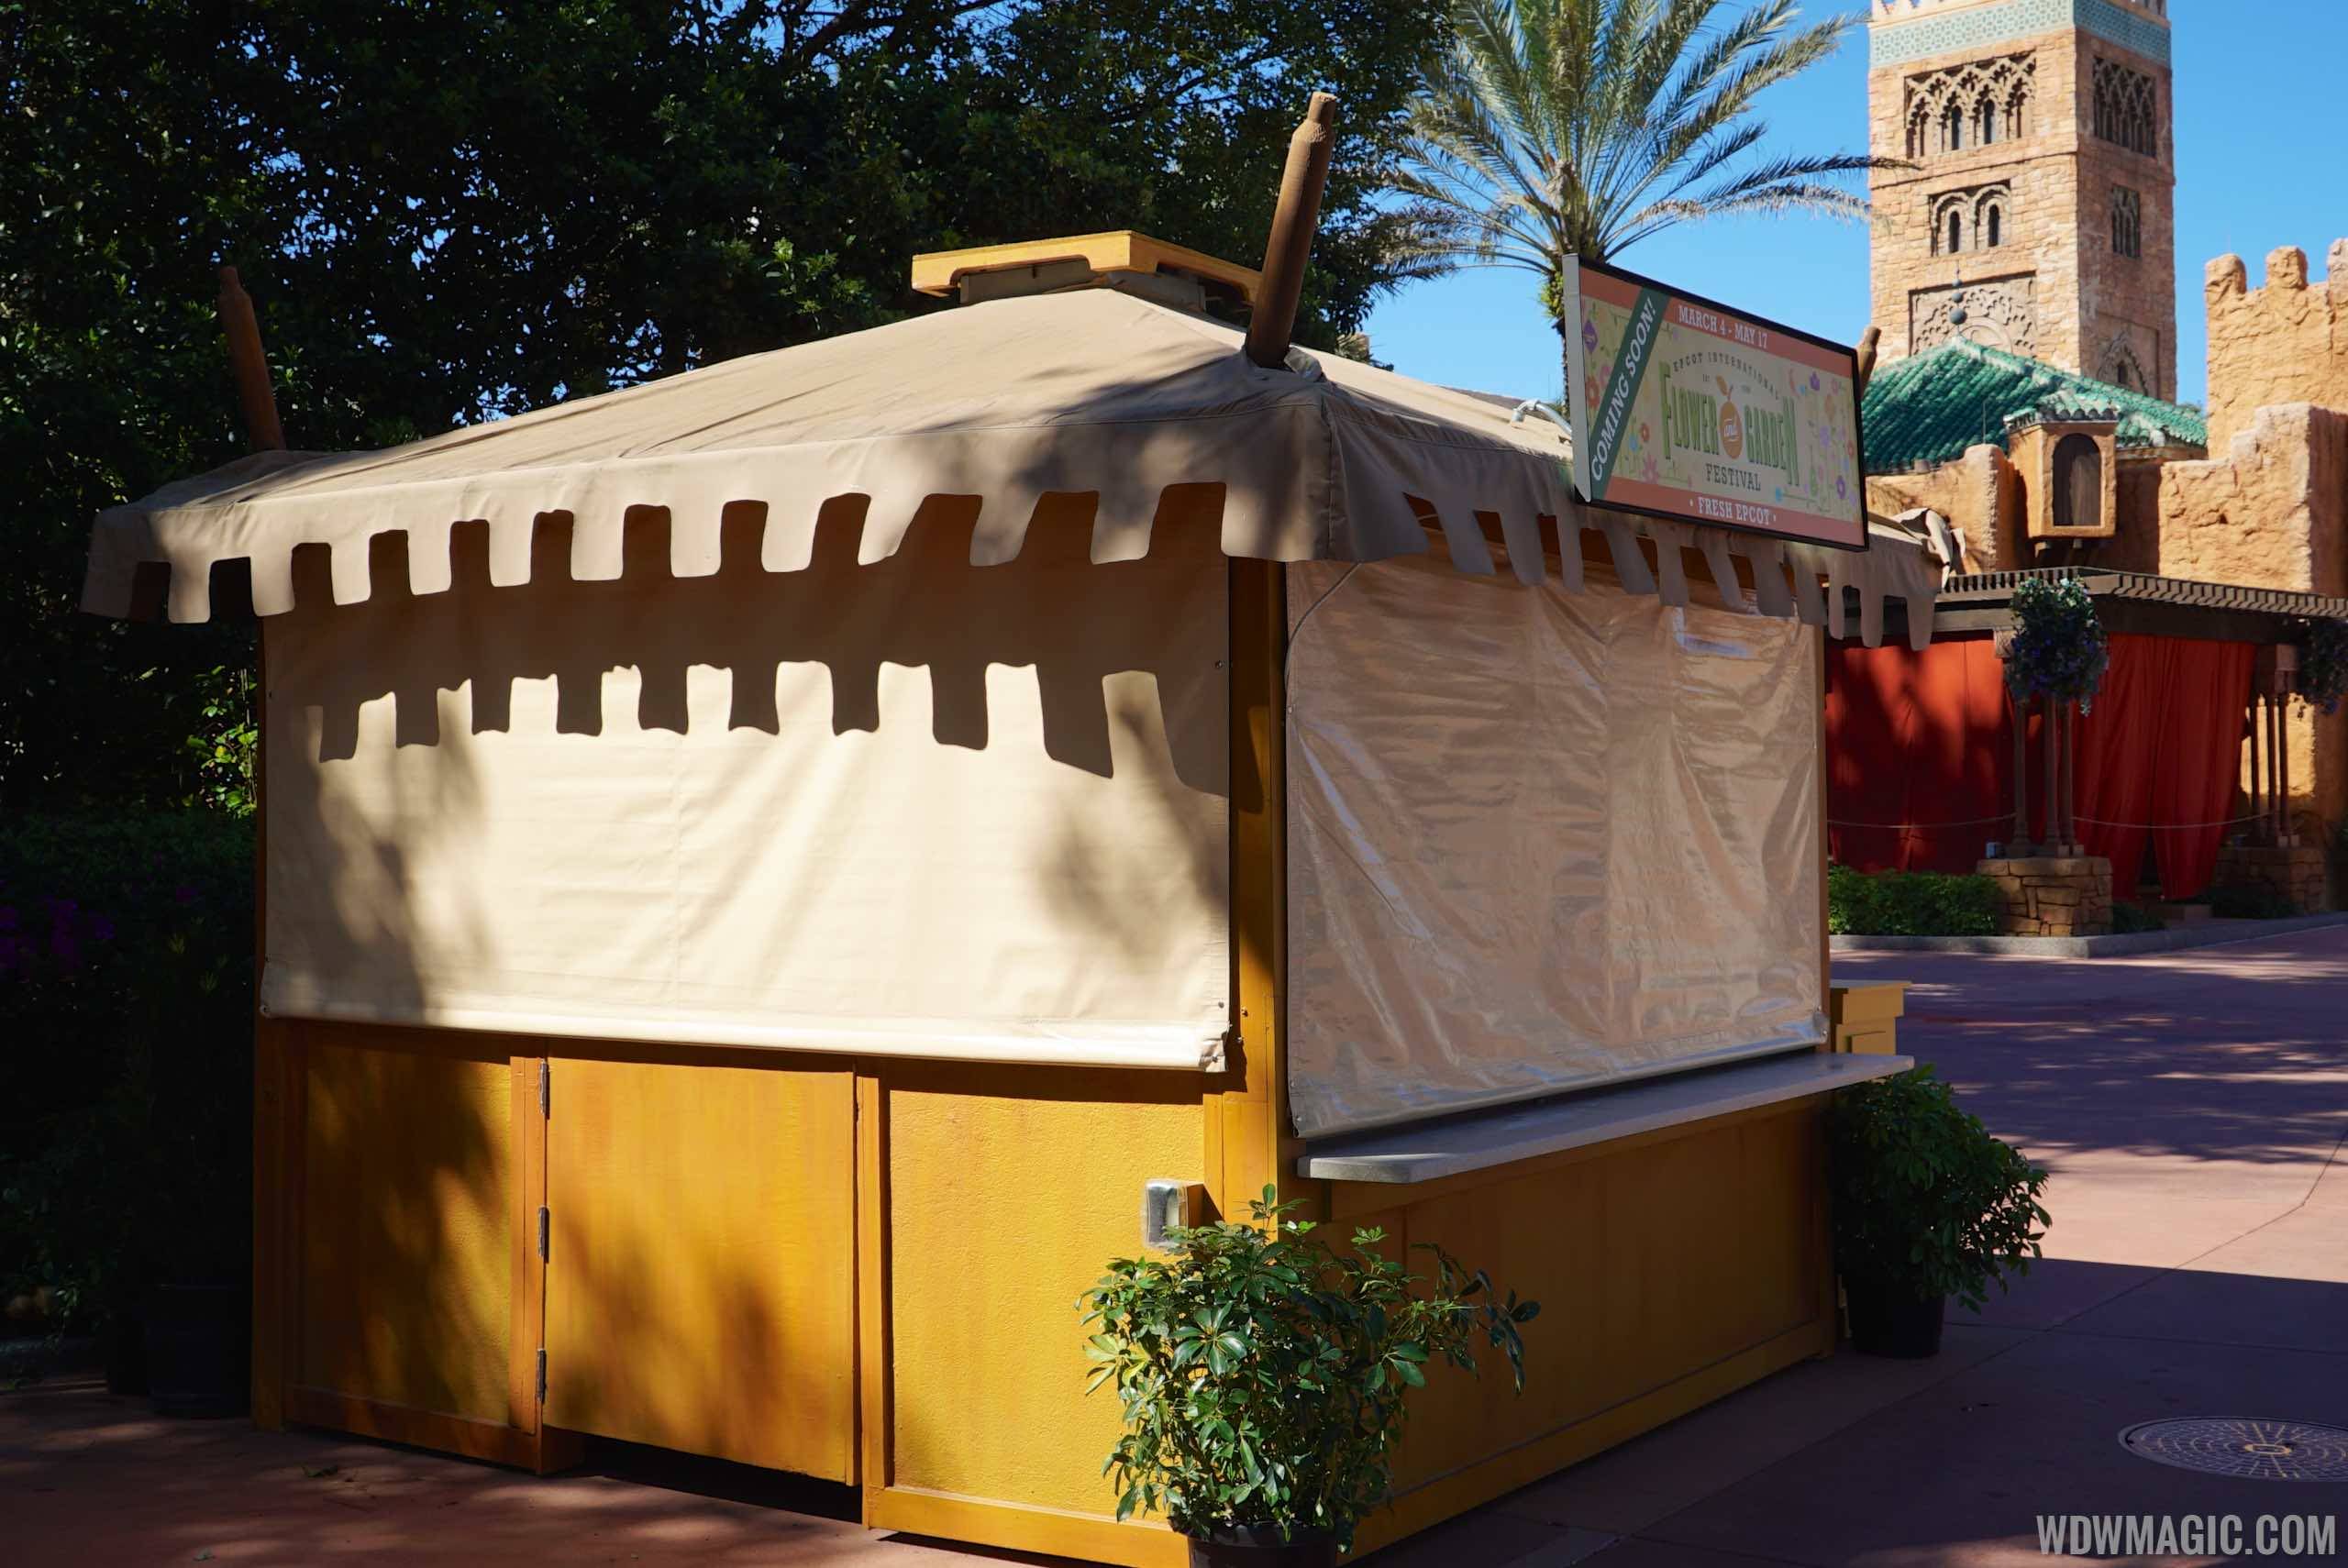 2015 Epcot Flower and Garden Festival Outdoor Kitchen and Topiary installation